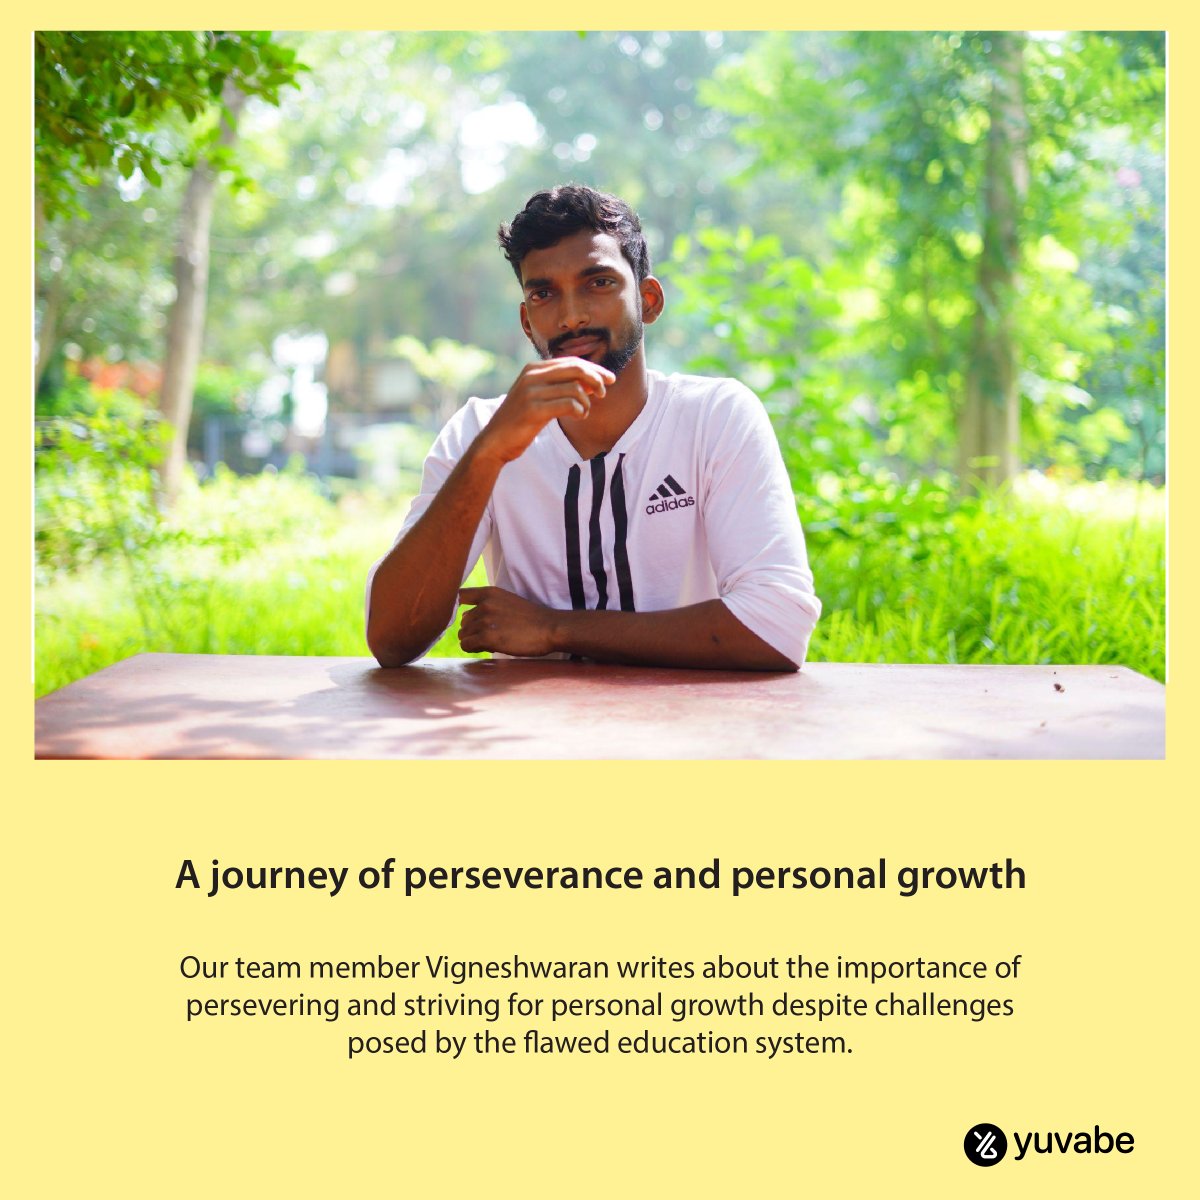 Vigneshwaran's perseverance and personal #growth journey have led him to become an inspiring member of  #yuvabe's Design and #marketing #team. To know more, click the link yuvabe.com/post/a-journey…

#workserveevolve #WSE #youth #blog